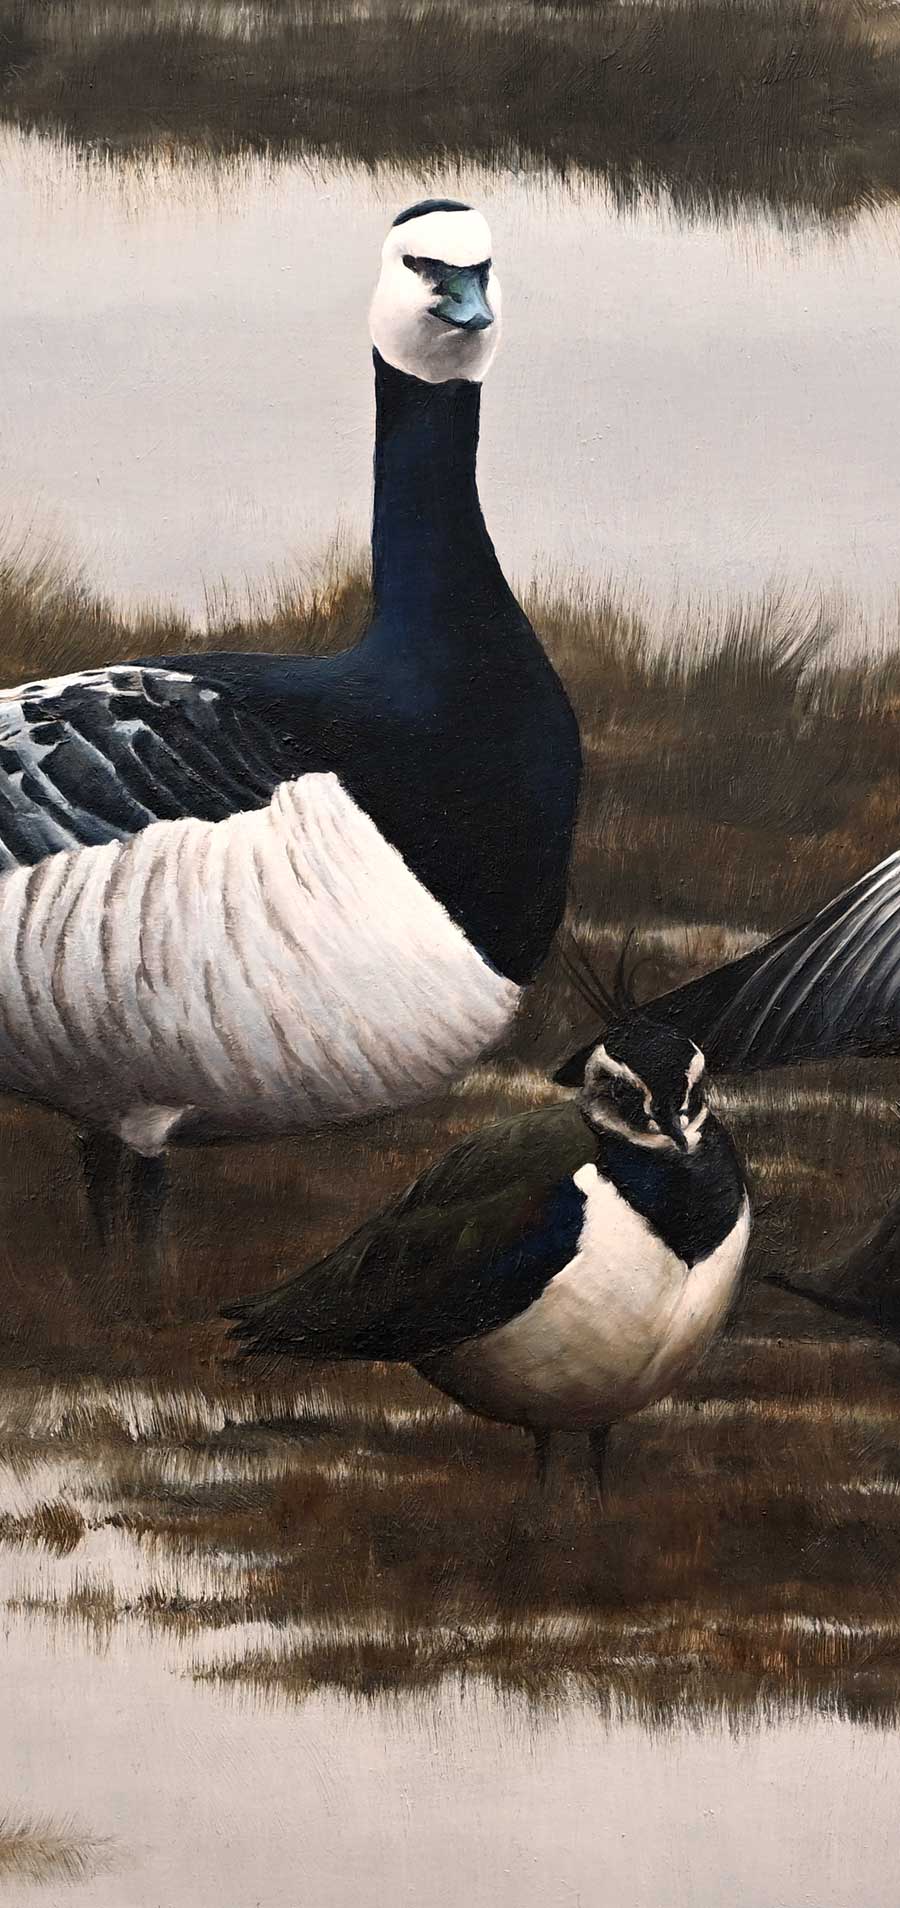 Barnacle Geese and Lapwing - An Original Oil Painting By Bird Artist Chris Lodge